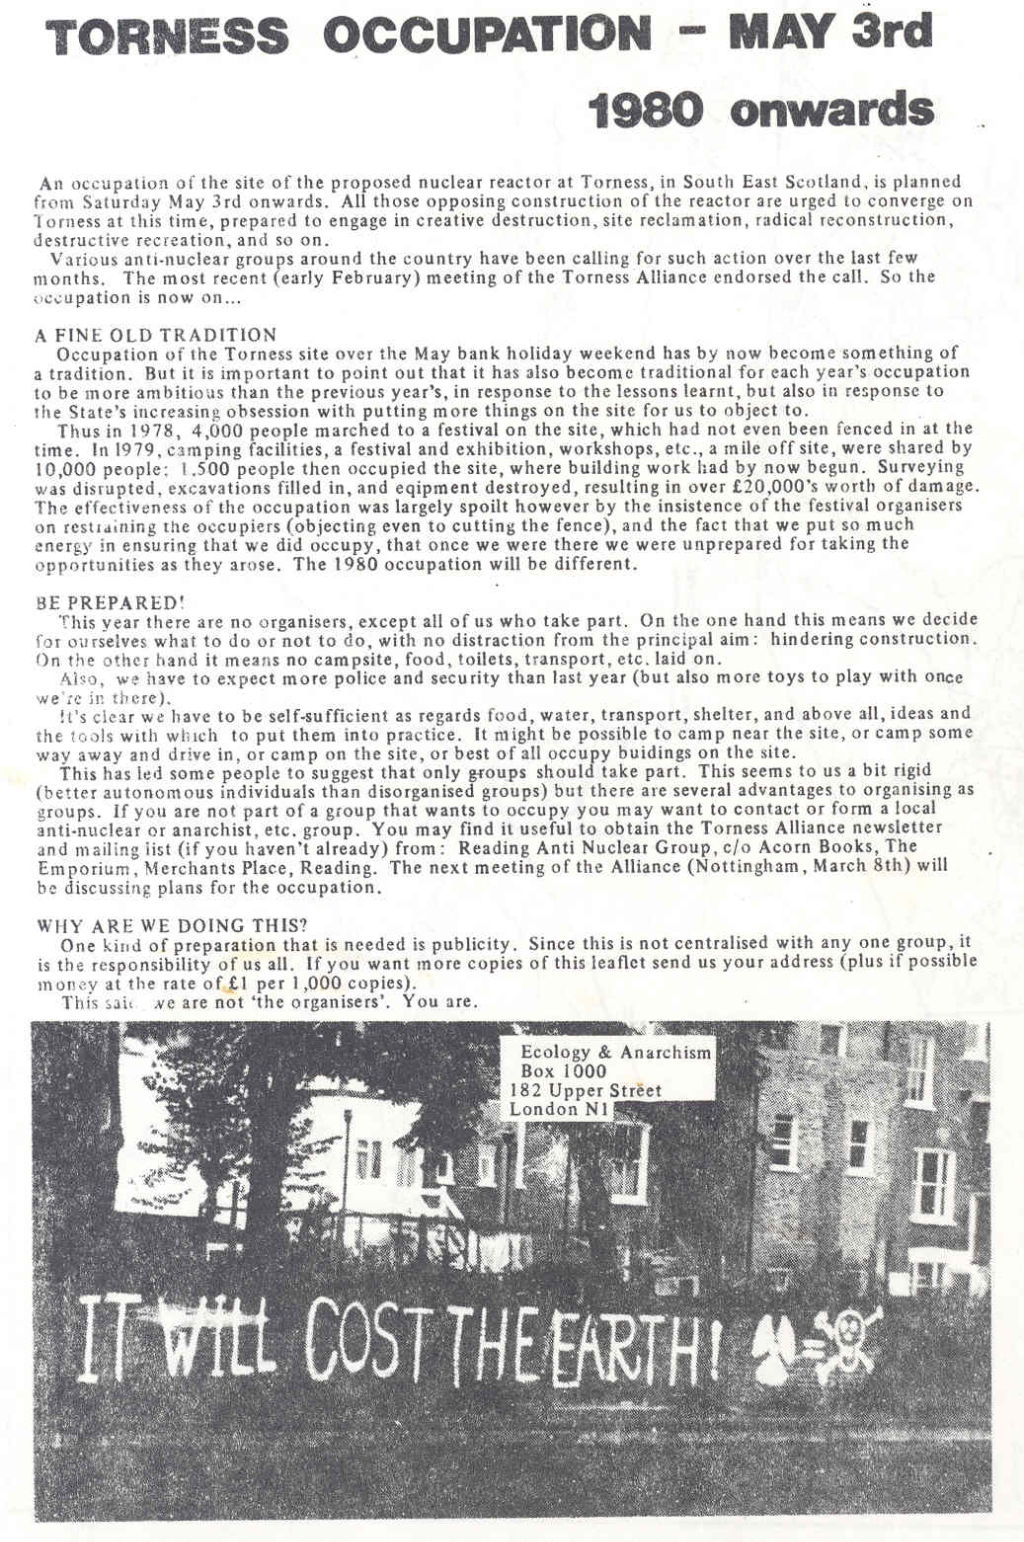 'Ecology and Anarchism' group: leaflet about proposed 'Torness Occupation', 1980